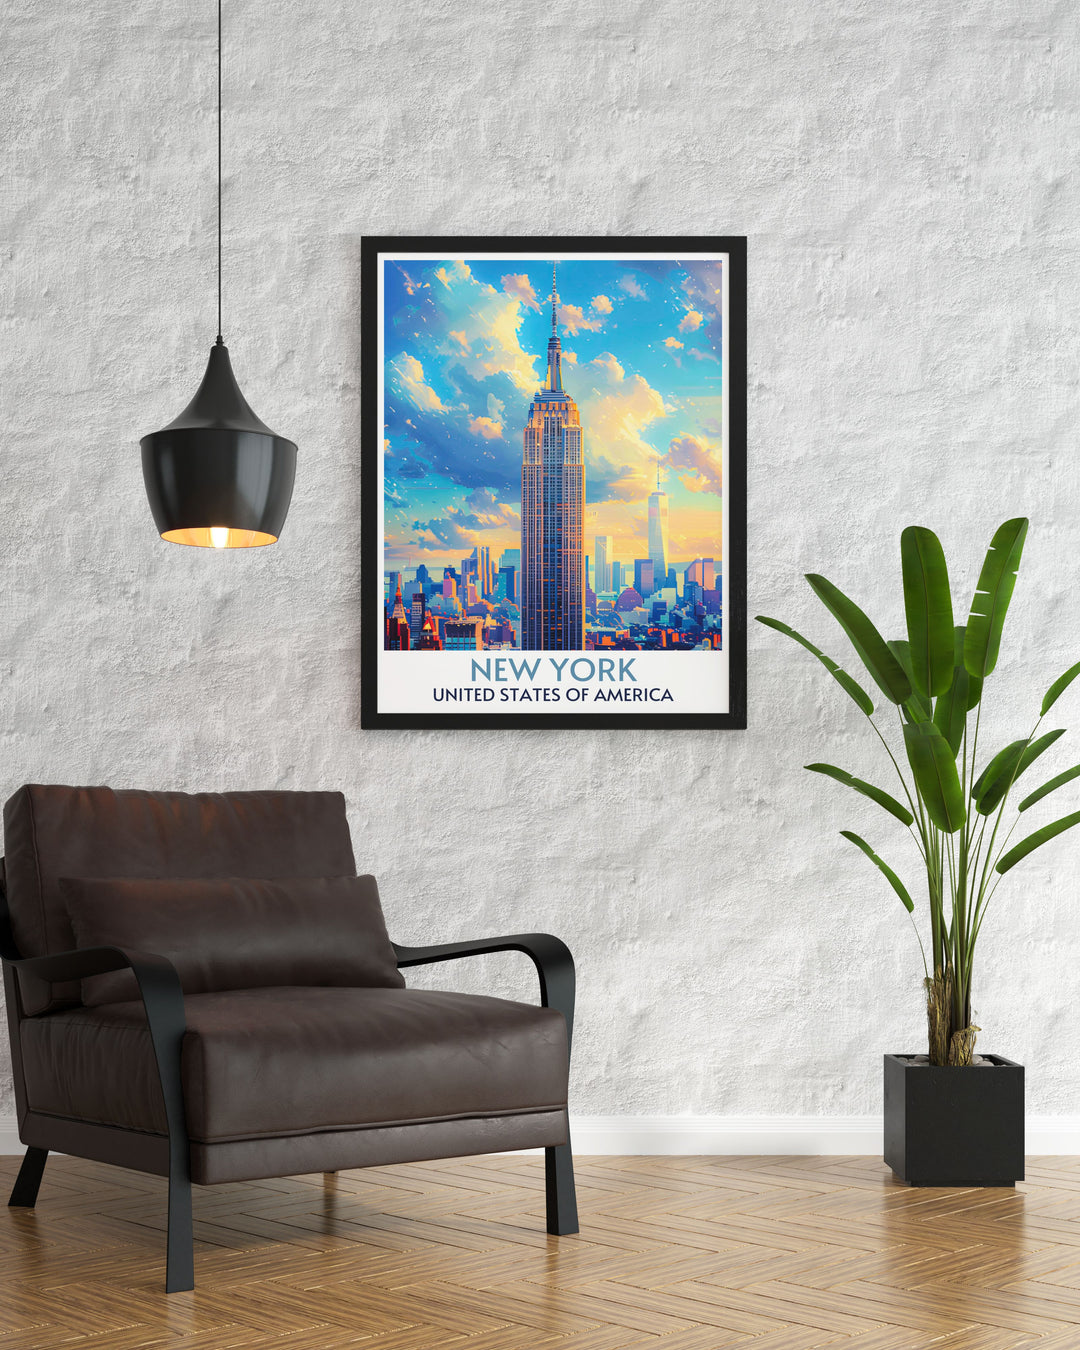 Detailed artwork of the Empire State Building, highlighting its architectural features against the city backdrop.